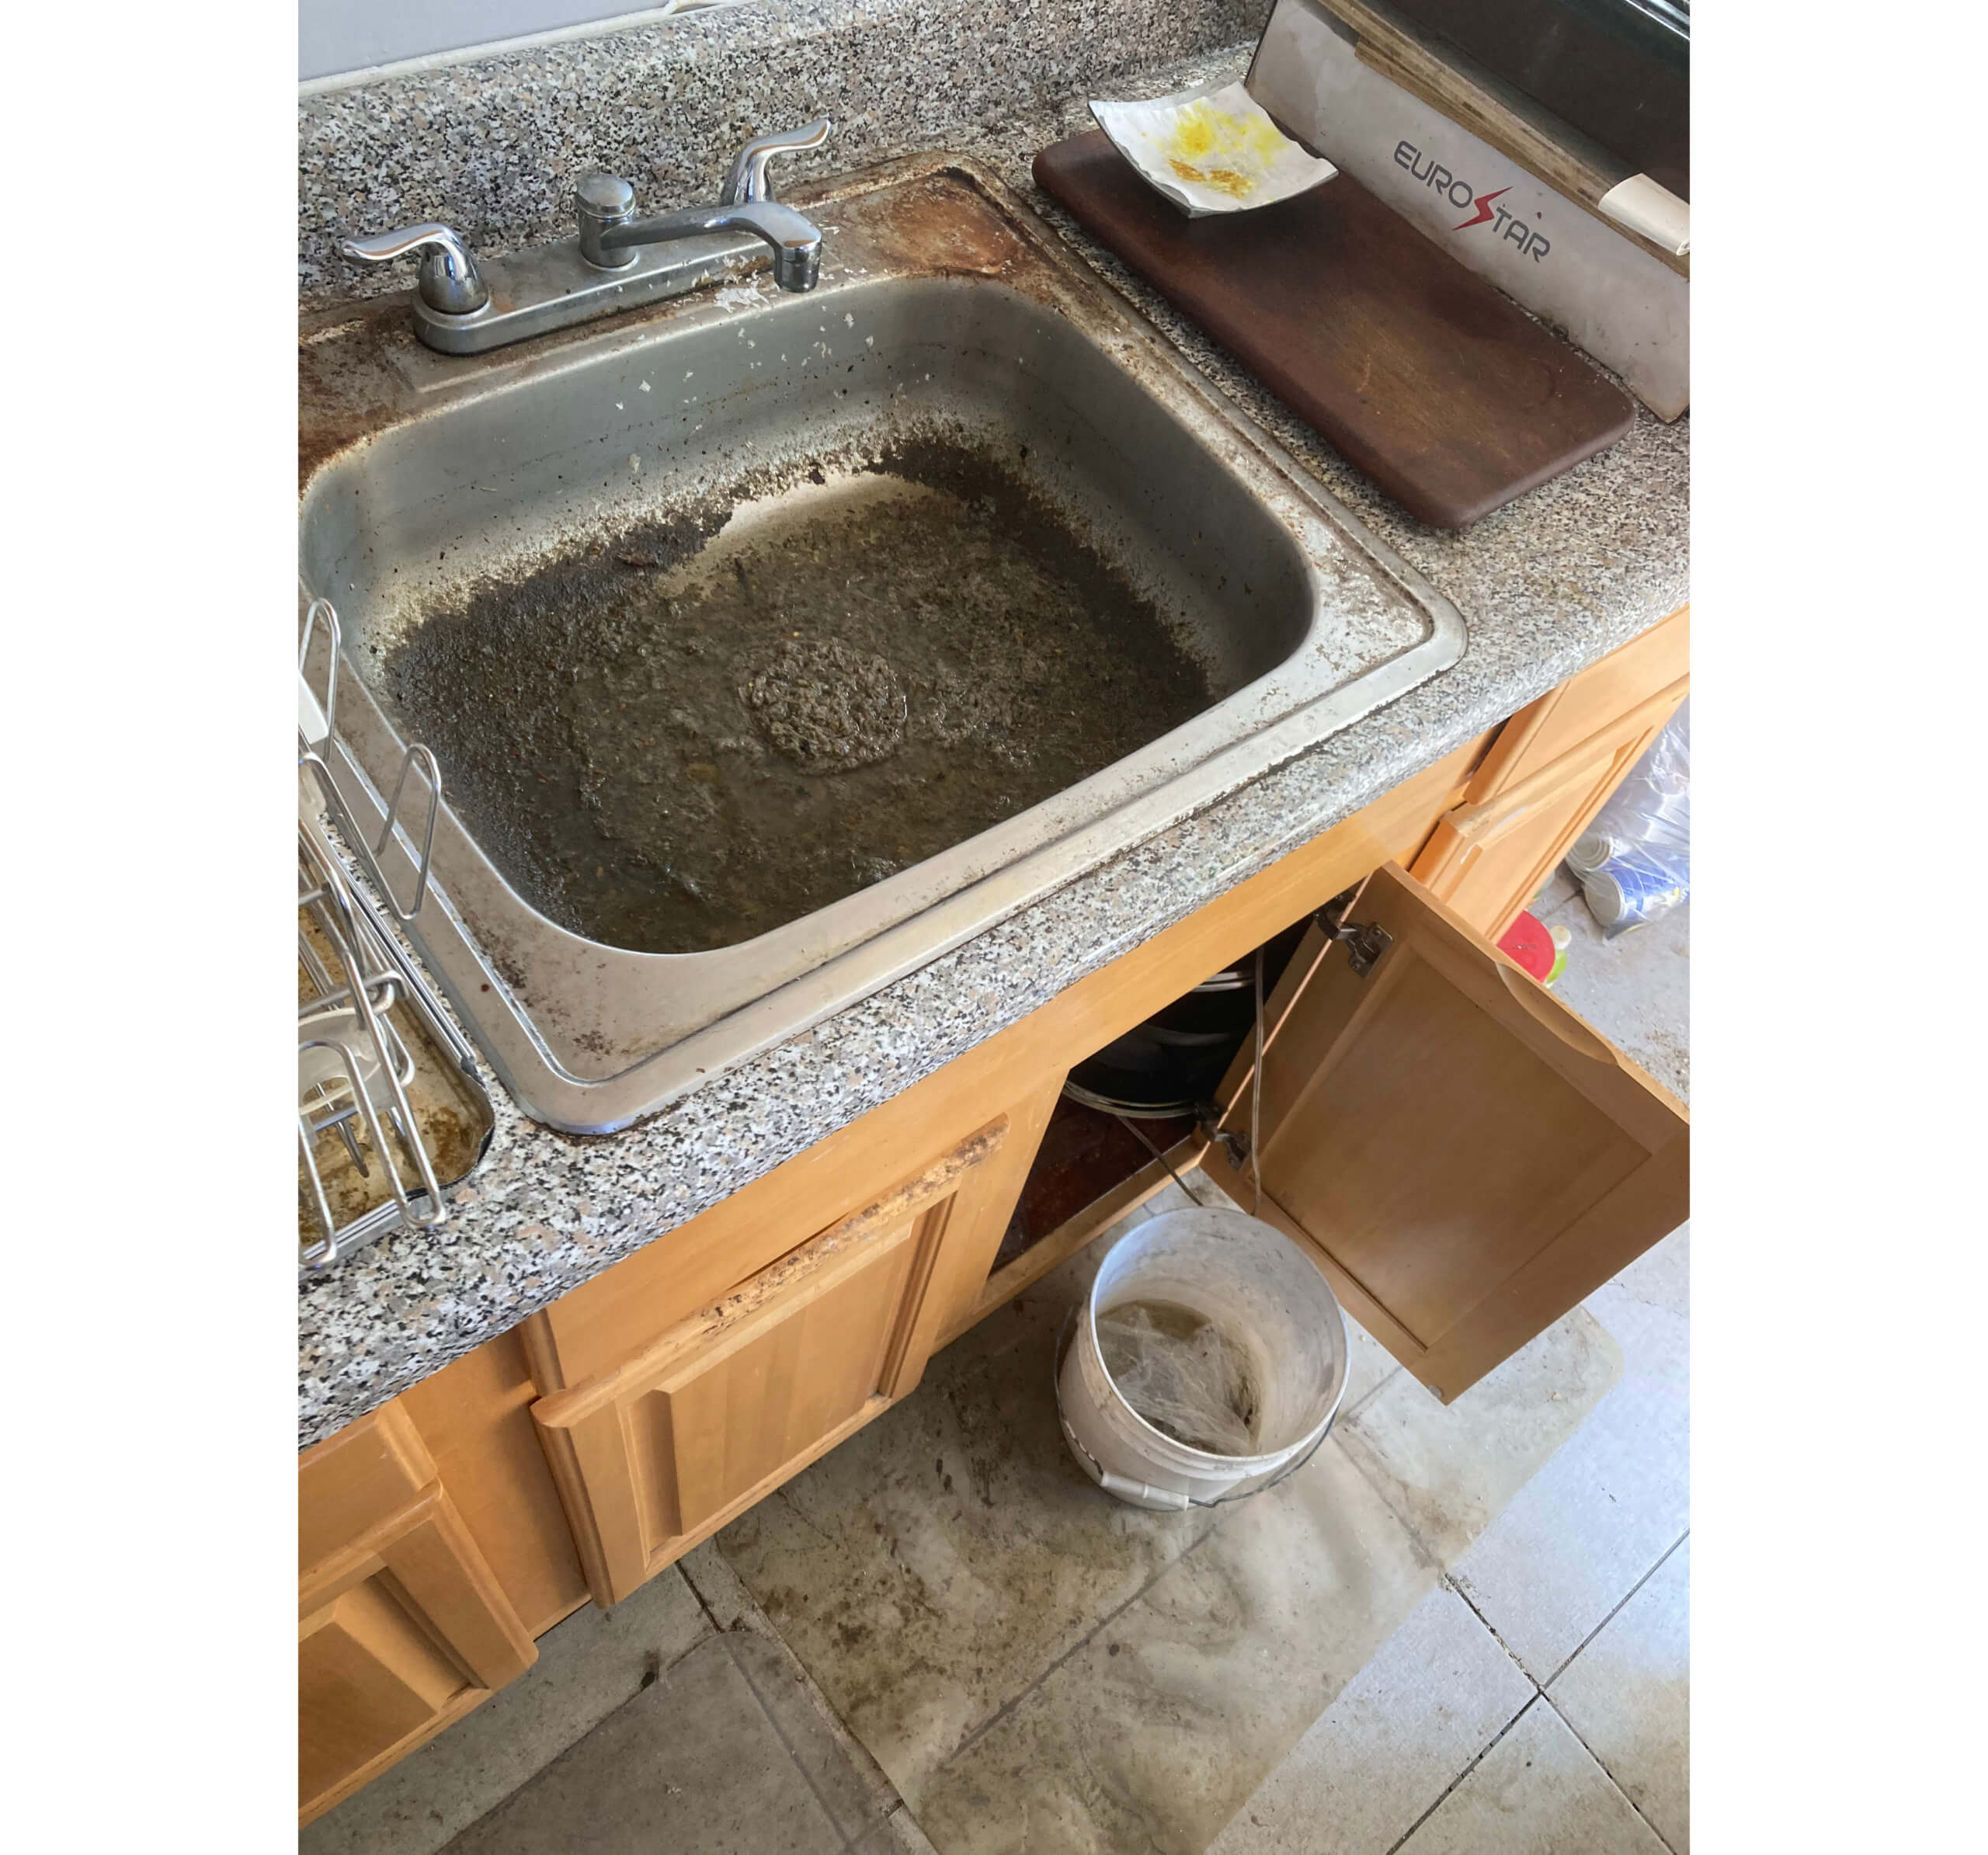 sewage filled sink in 972 park place